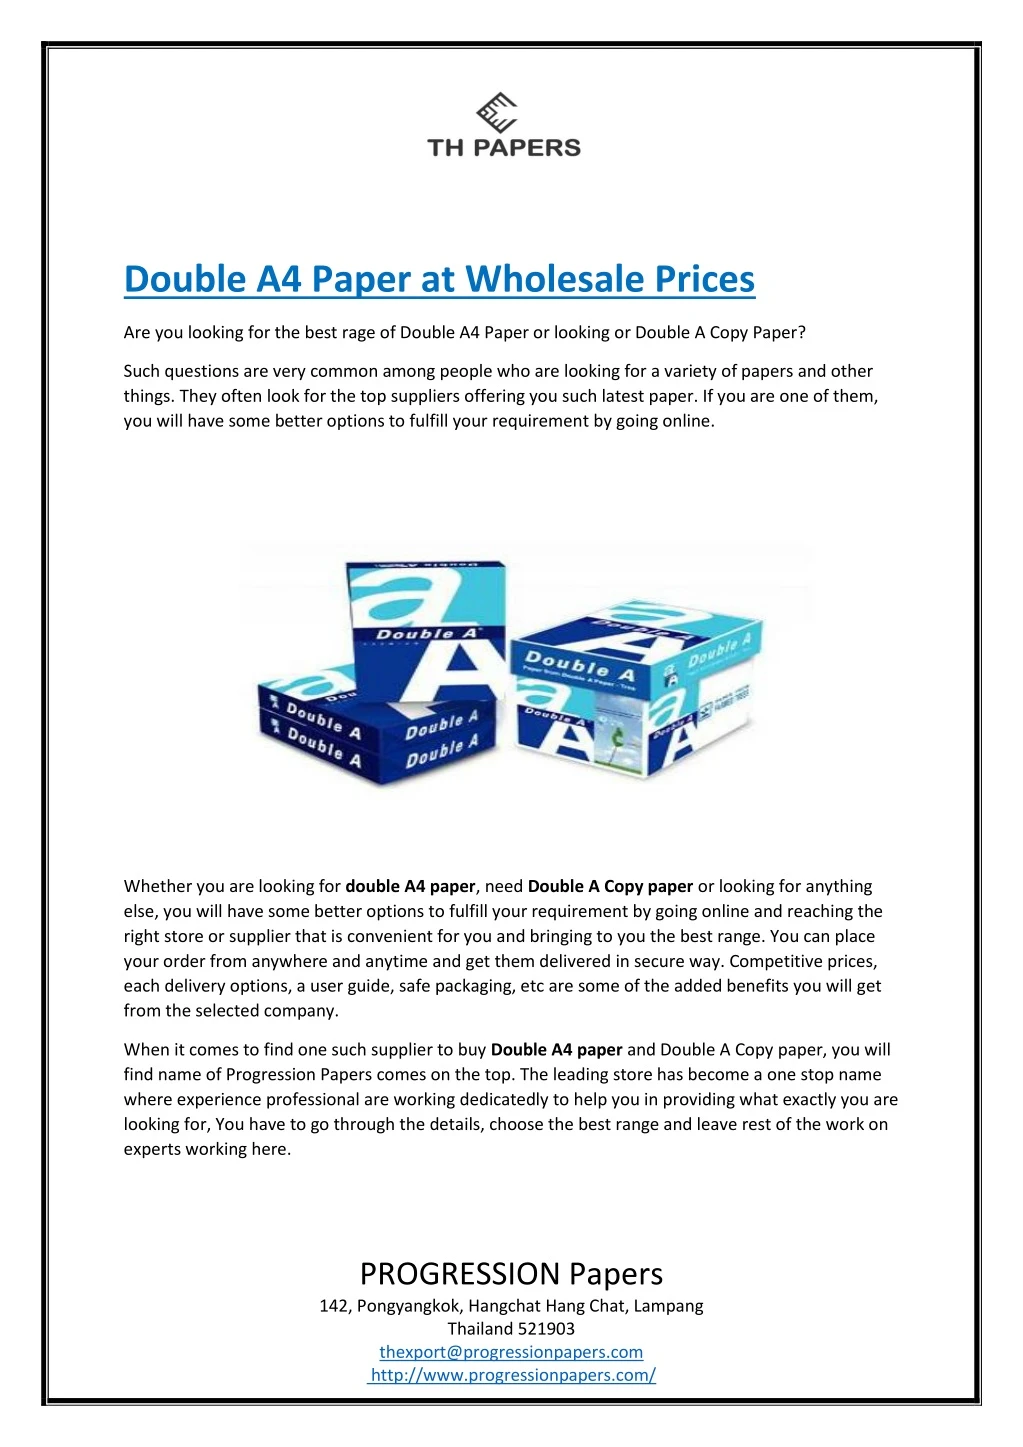 double a4 paper at wholesale prices